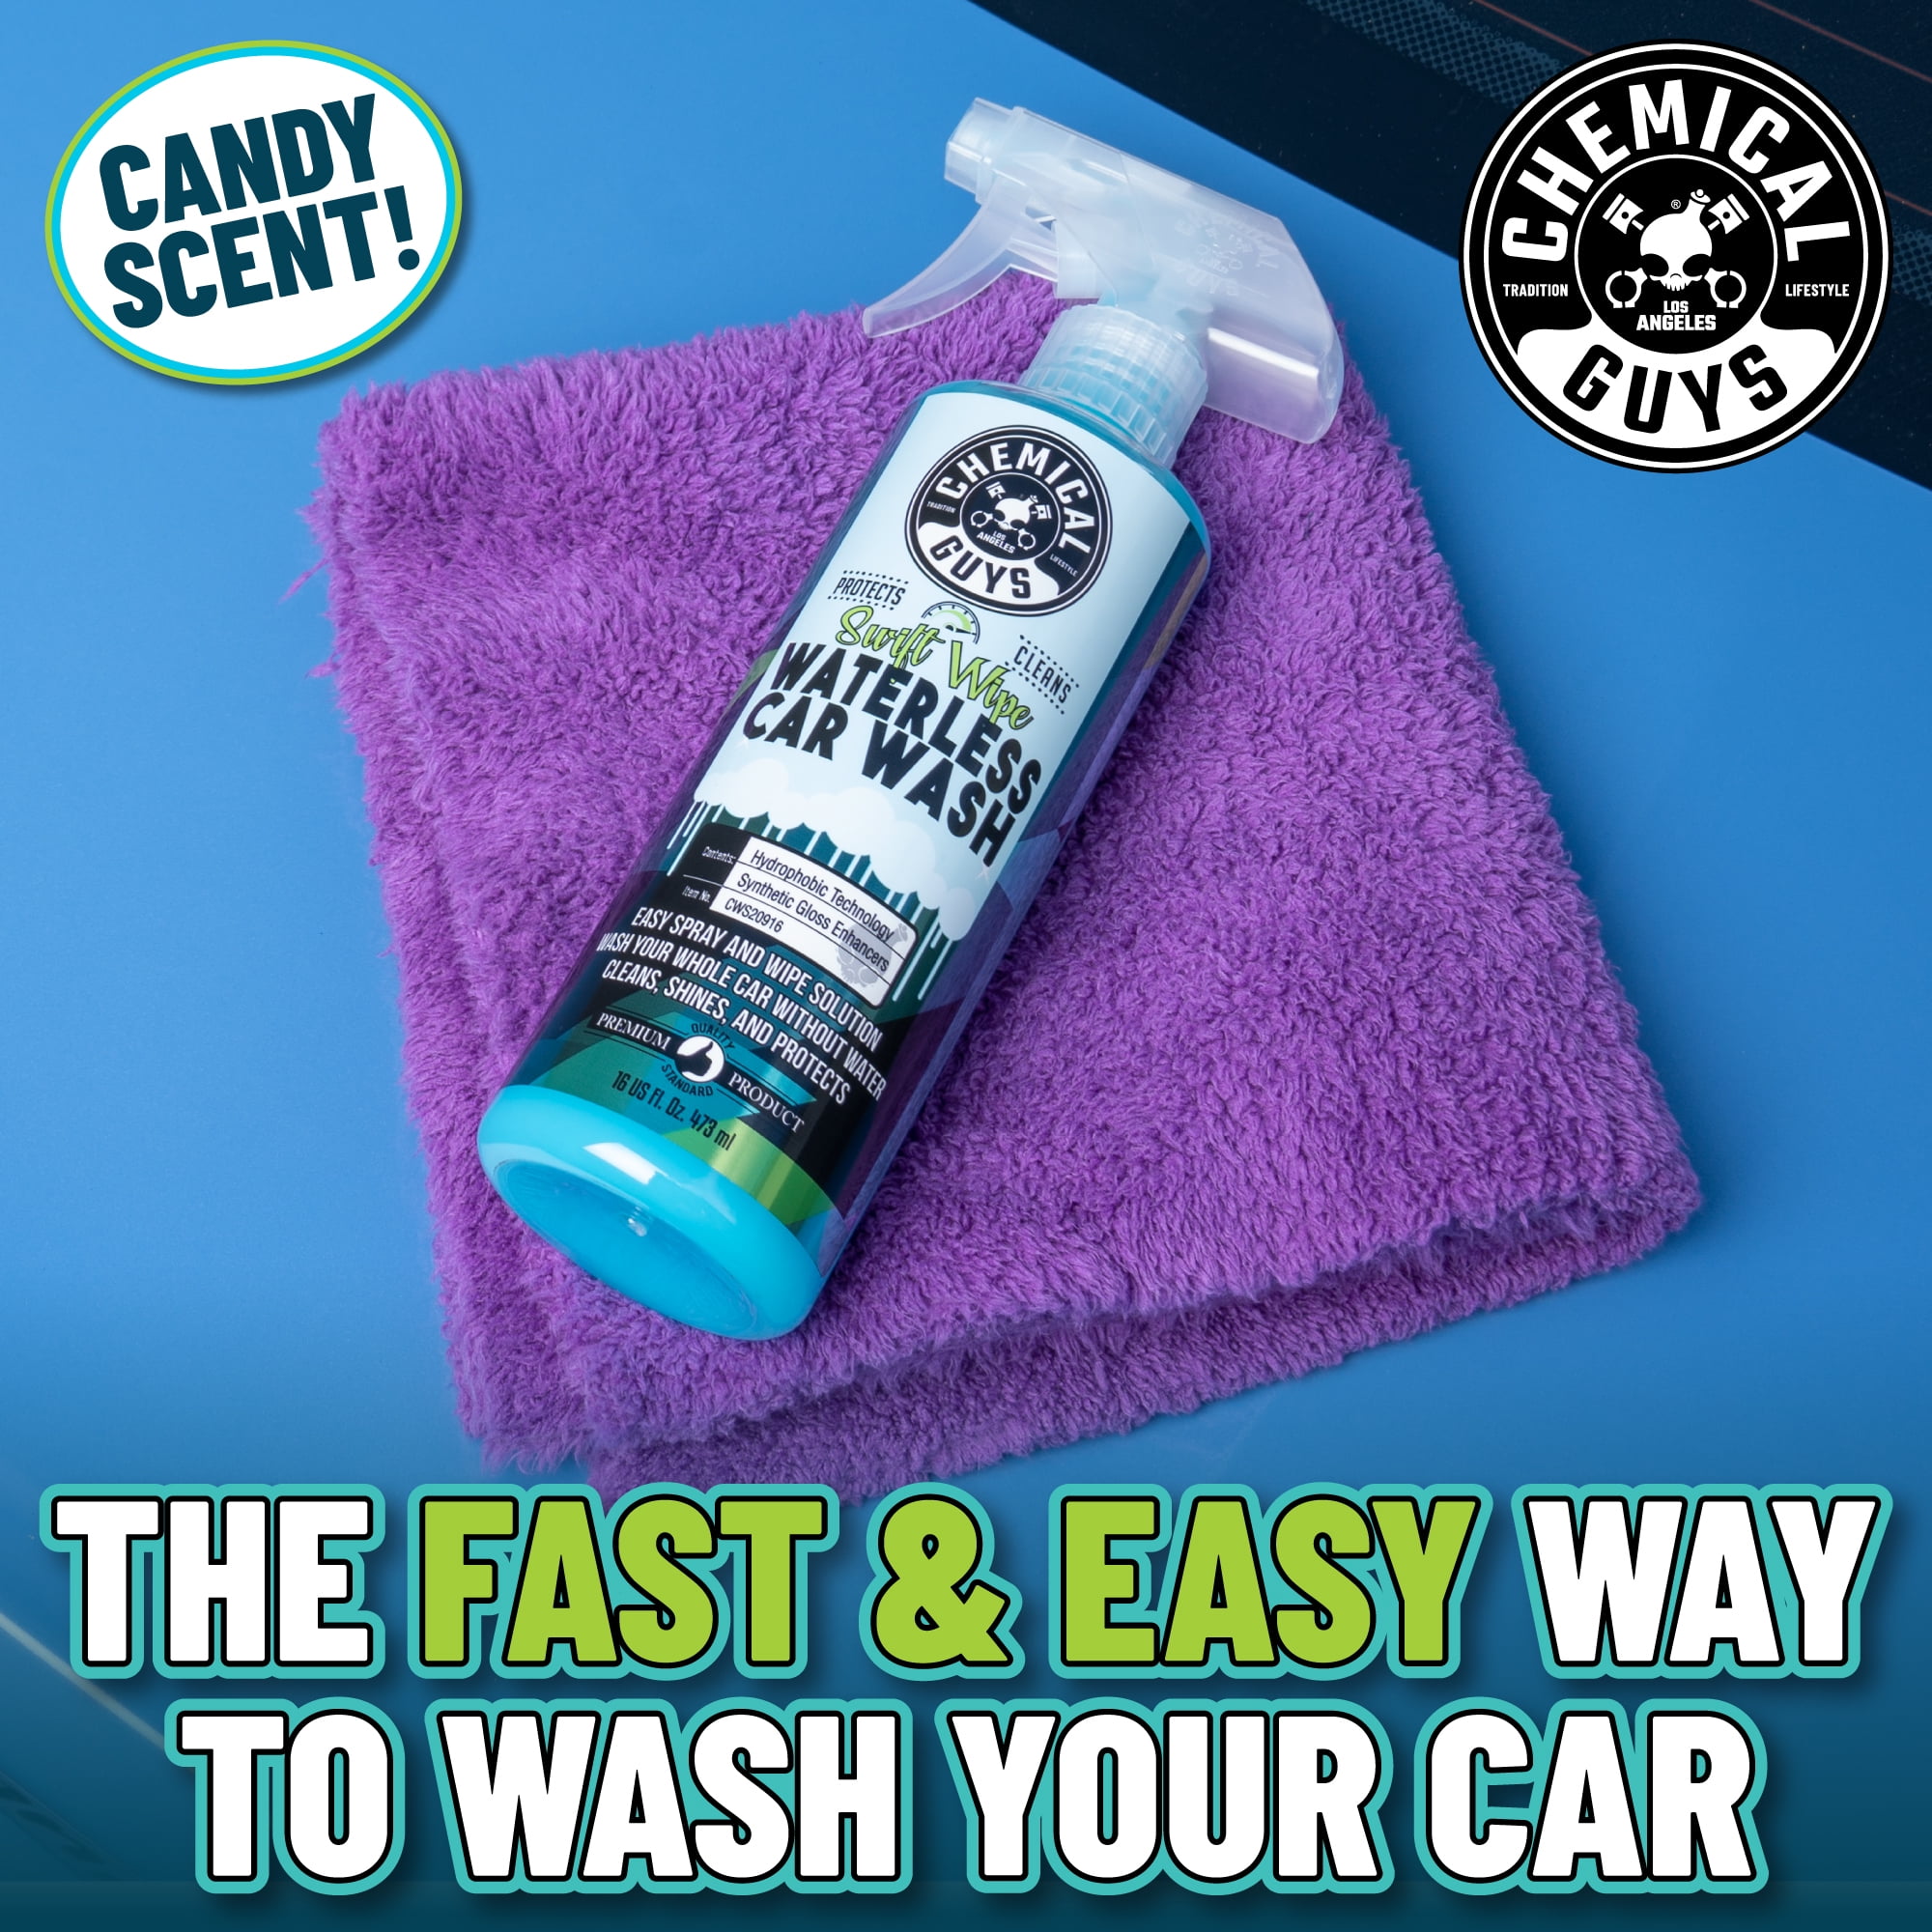 Chemical Guys CWS20964 Swift Wipe Sprayable Waterless Car Wash, Easily  Clean - Just Spray & Wipe, Safe for Cars, Trucks, Motorcycles, RVs & More,  64